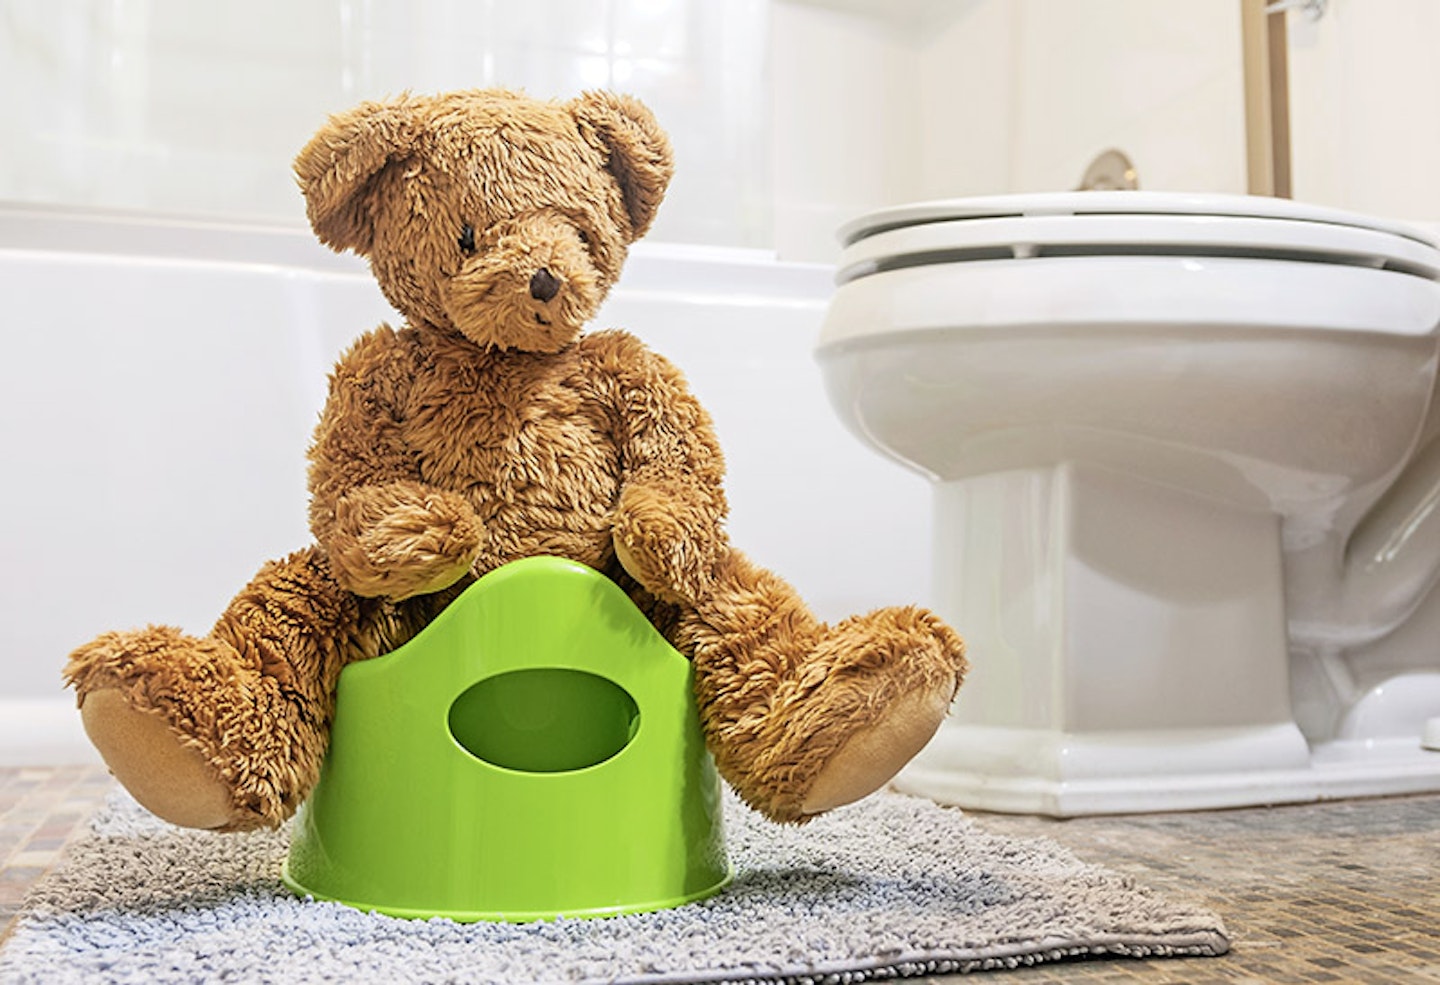 Potty training games to play with your toddler